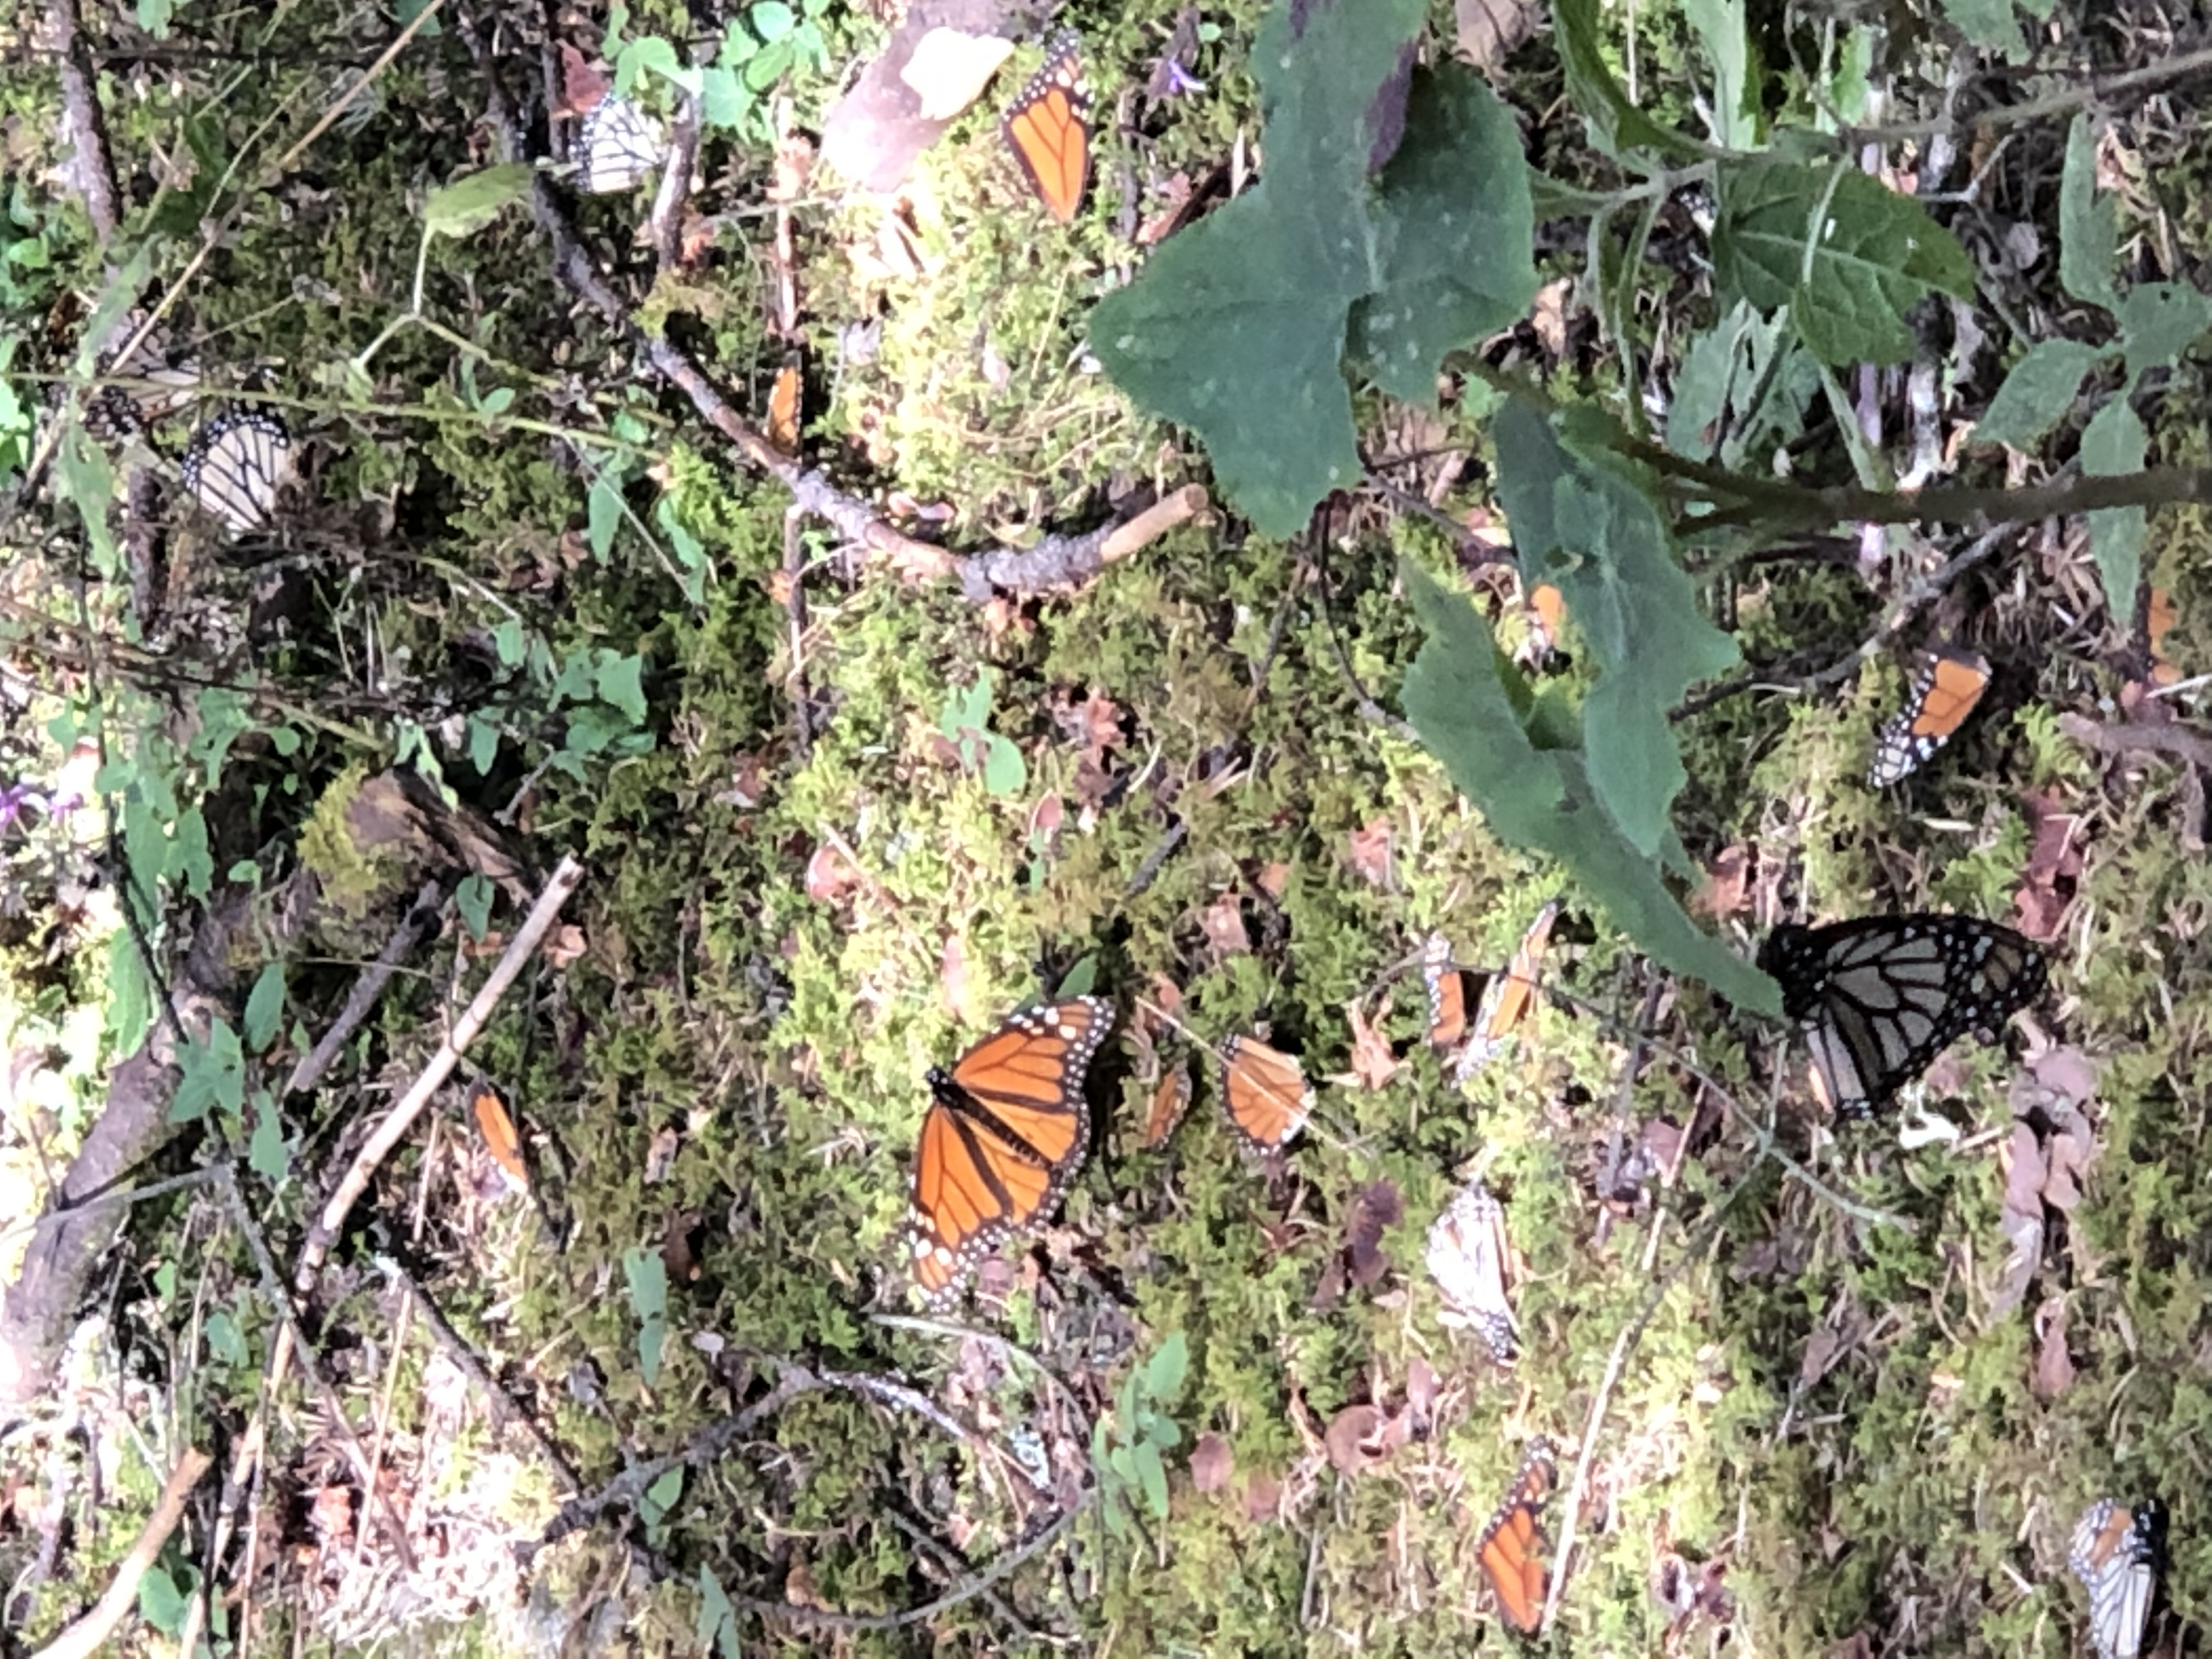 Monarchs on the forest floor